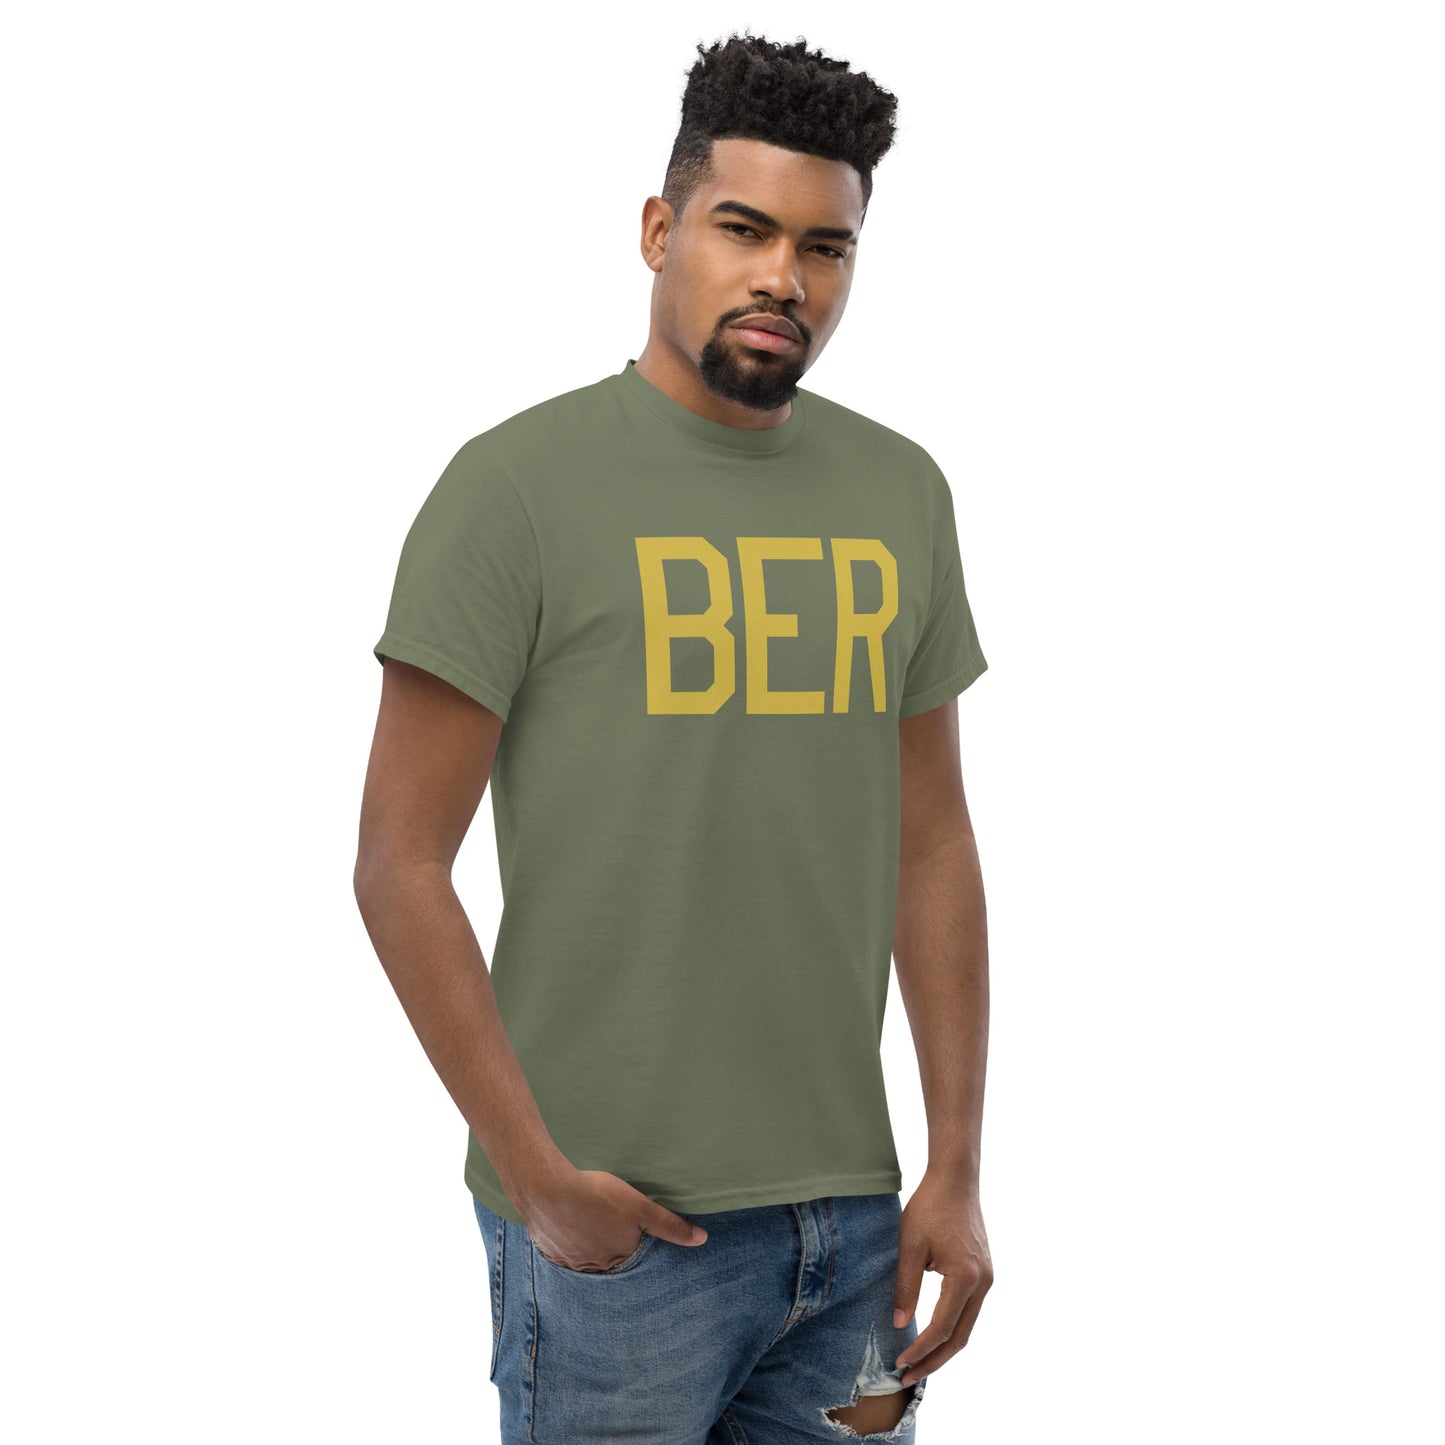 Aviation Enthusiast Men's Tee - Old Gold Graphic • BER Berlin • YHM Designs - Image 08